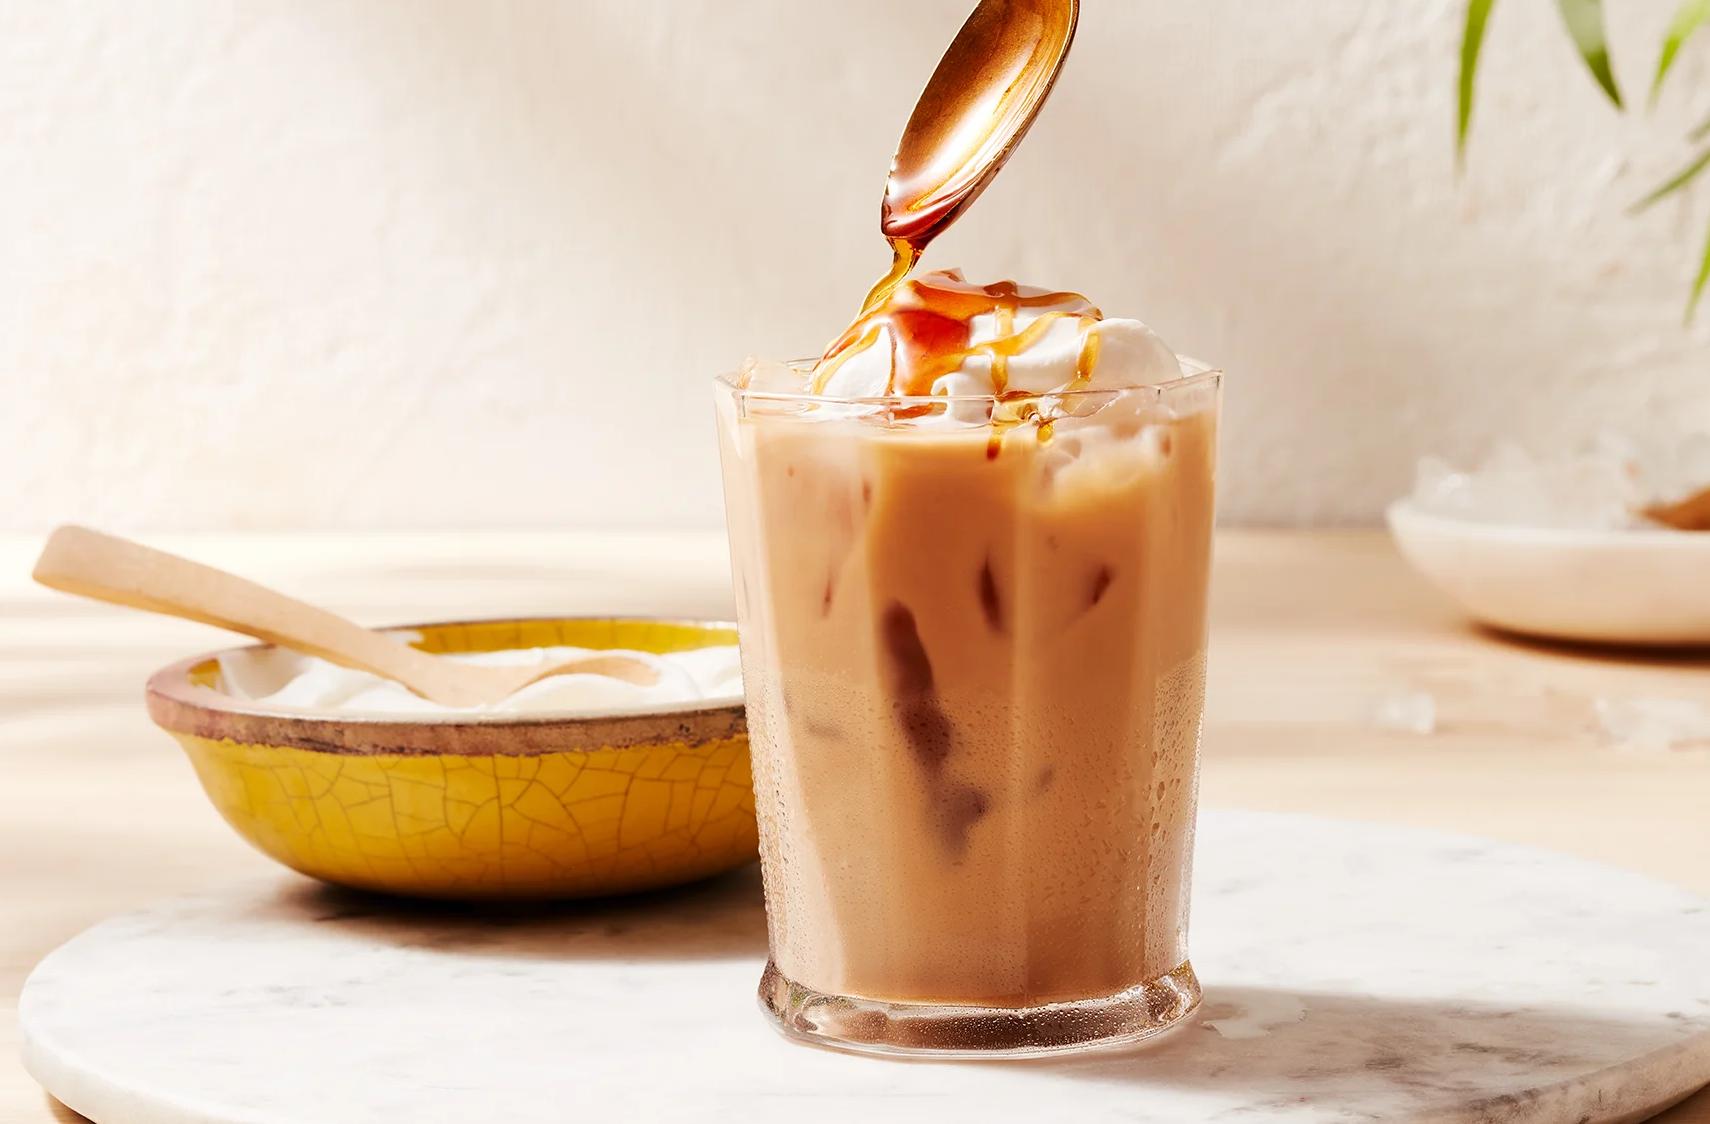  This iced mocha coffee drink is perfect for any time of the day - be it breakfast, brunch or after dinner!